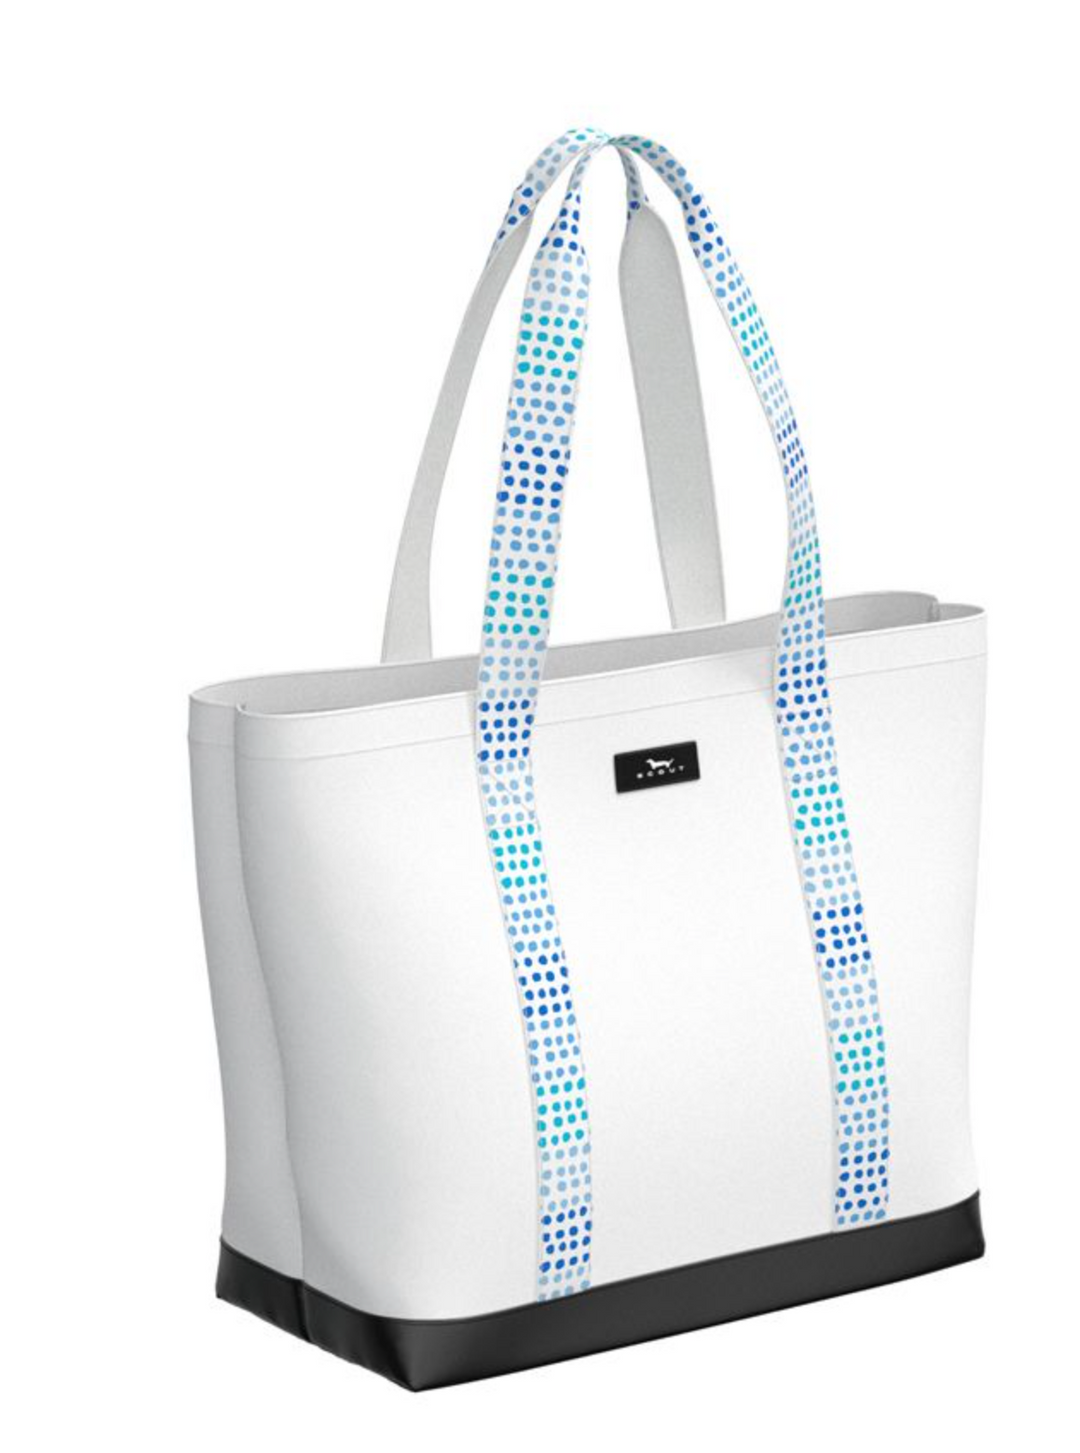 An extra-lightweight, dressed up spin on the quintessential utility fabric, this durable, easy-clean canvas bag features fun, patterned handles and a solid-color bottom. With its easy access open-top design, the Wanderer is ideal for everyday toting.